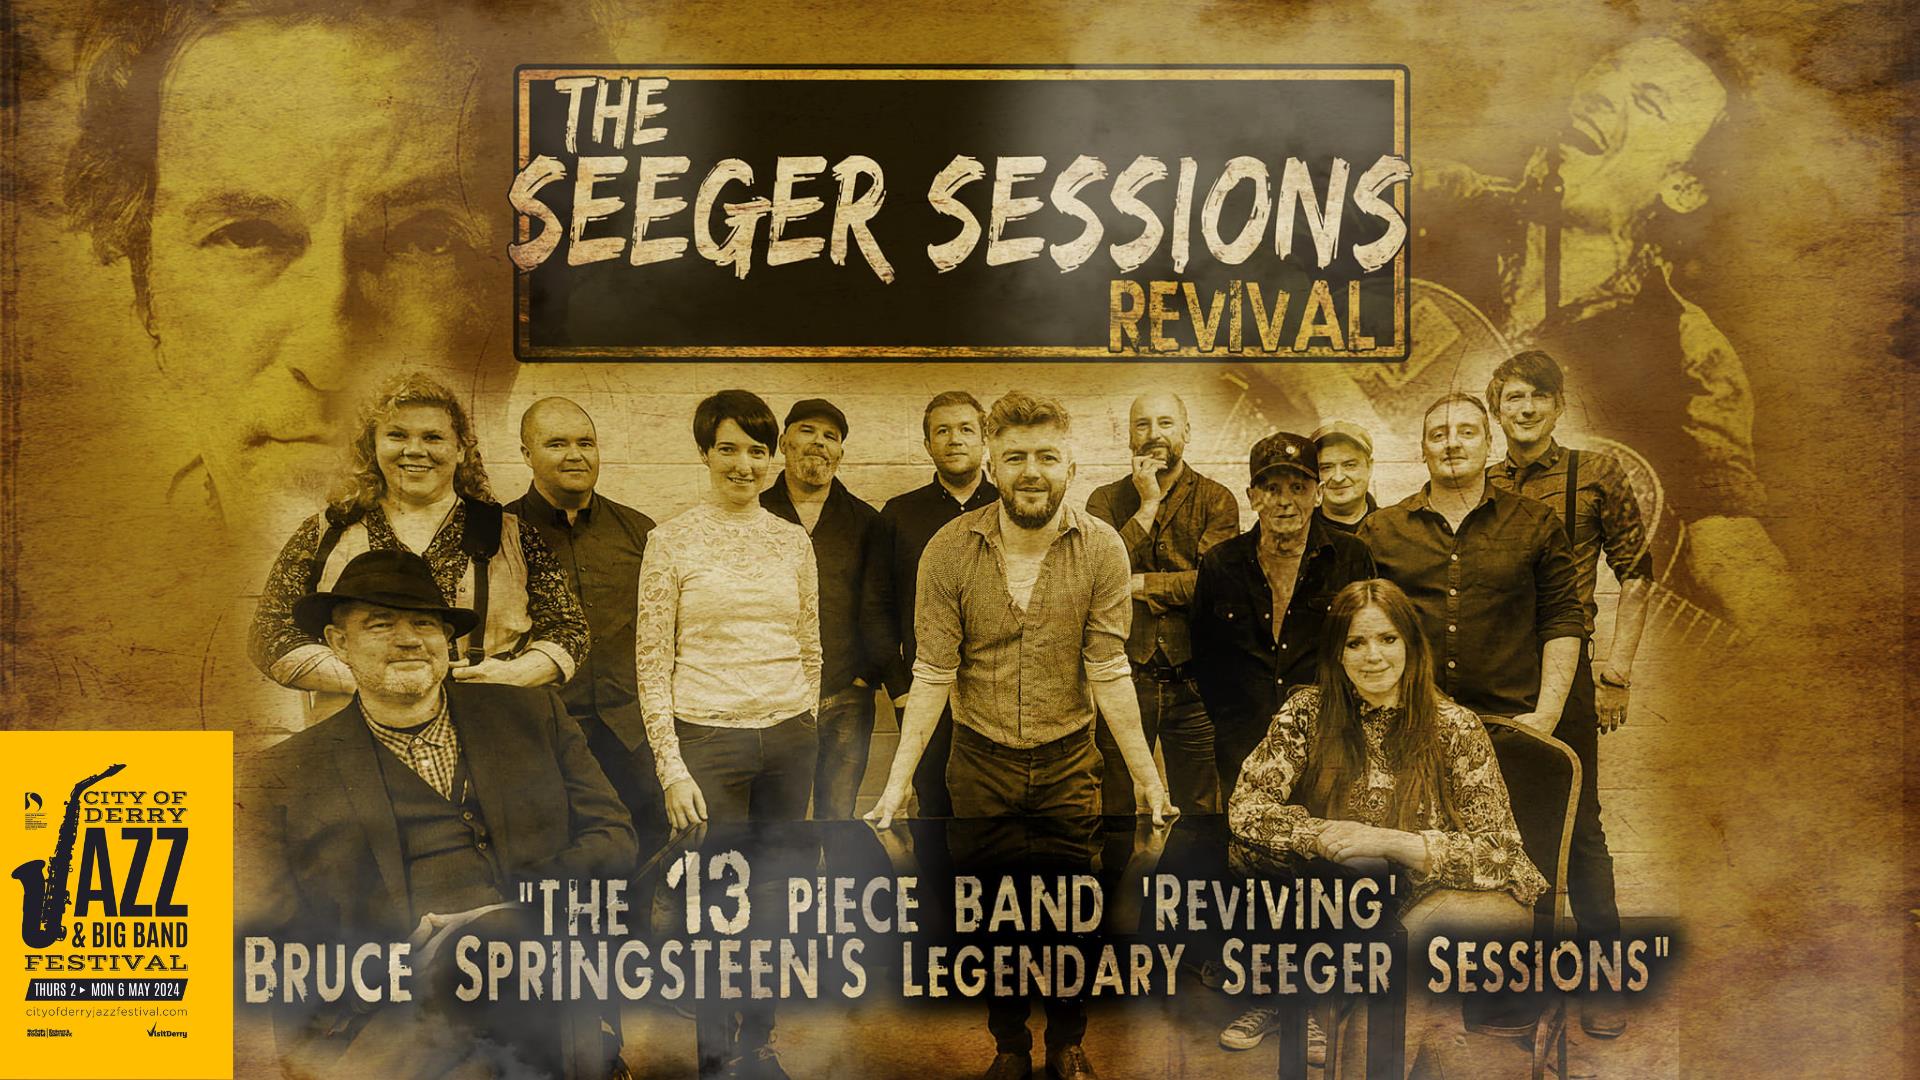 Seeger Sessions Revival - The 13 piece band reviving Bruce Springsteen's Legendary Seeger Sessions